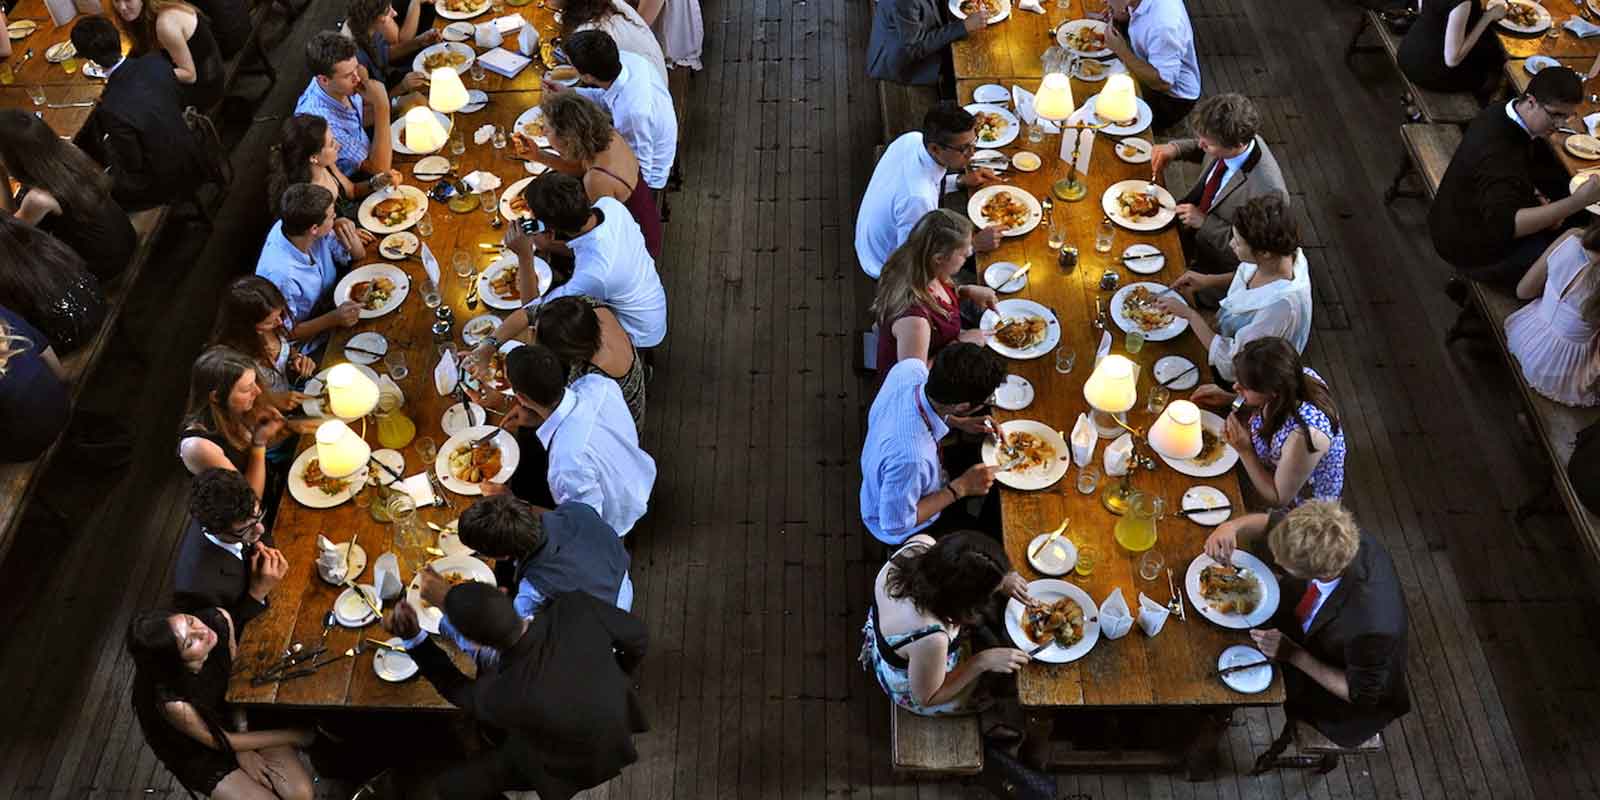 Students eating dinner in Oxford college